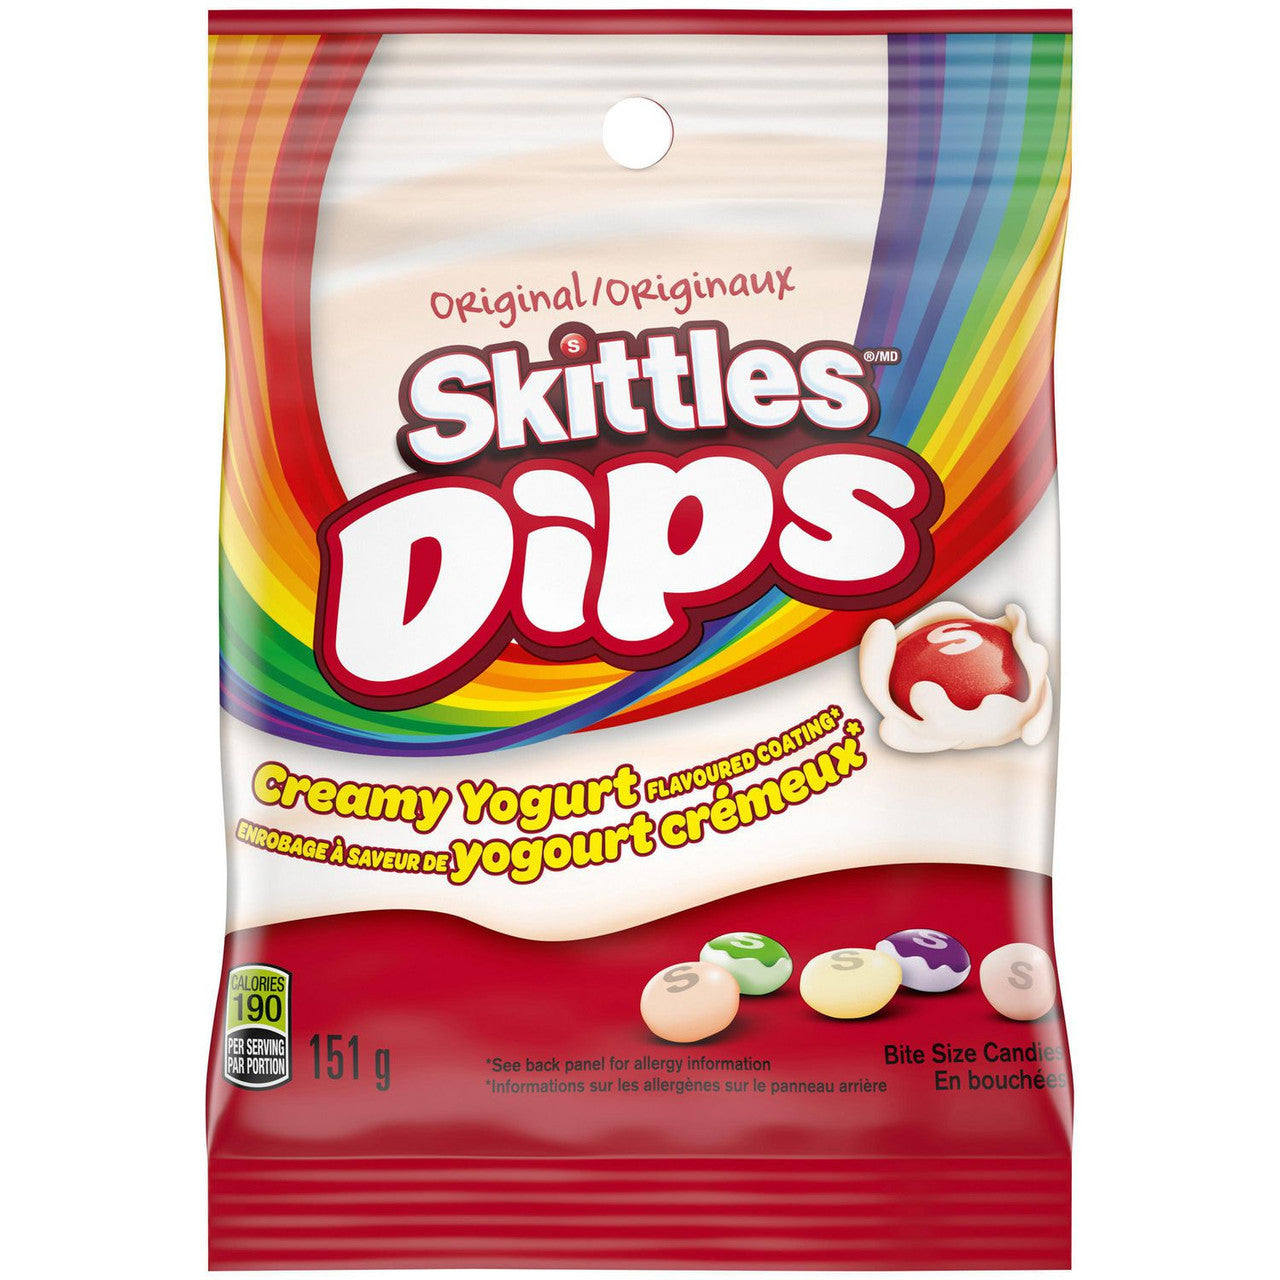 Skittles Dips Yogurt Covered Chewy Candy 151g/5.3 oz {Imported from Canada}